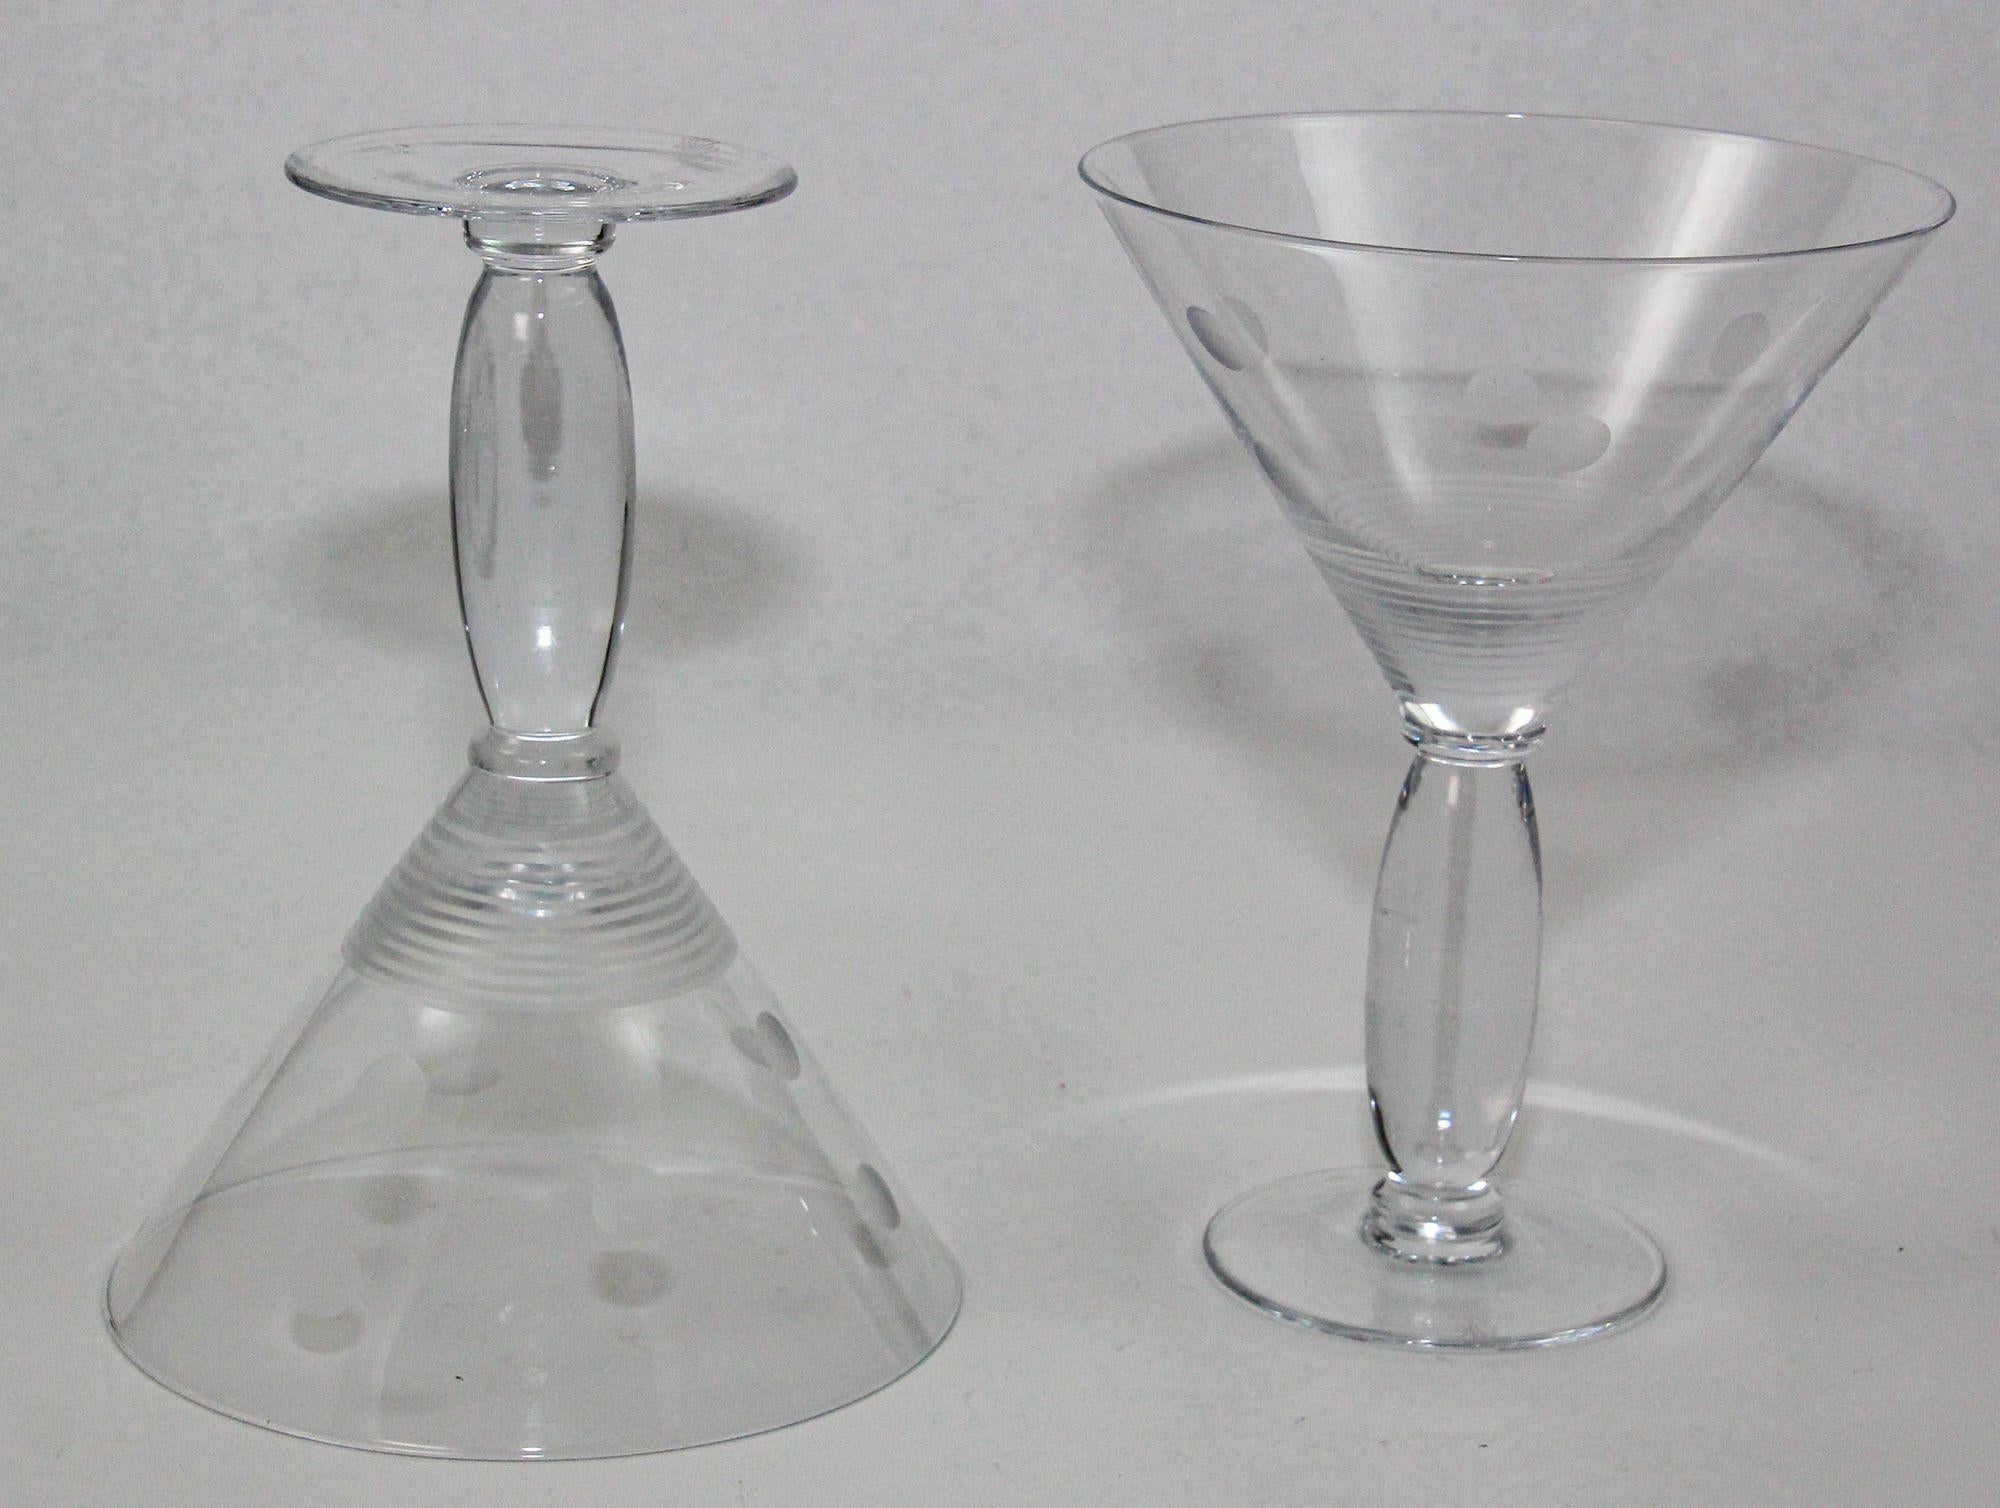 20th Century ROYAL DOULTON Martini Crystal Etched Glasses Set of 2 Vintage Cocktail Barware For Sale